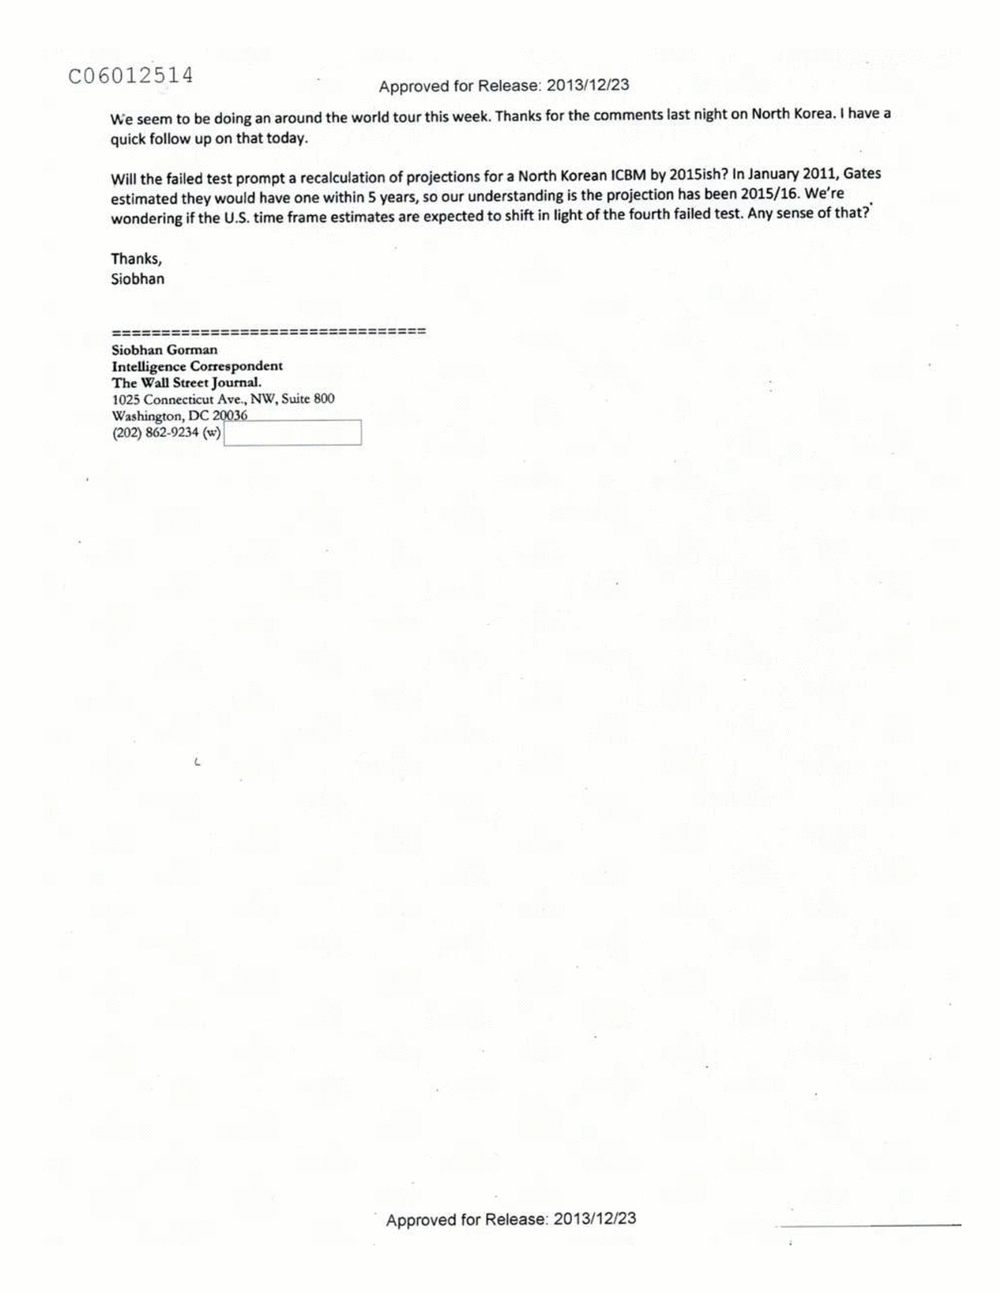 Page 31 from Email Correspondence Between Reporters and CIA Flacks